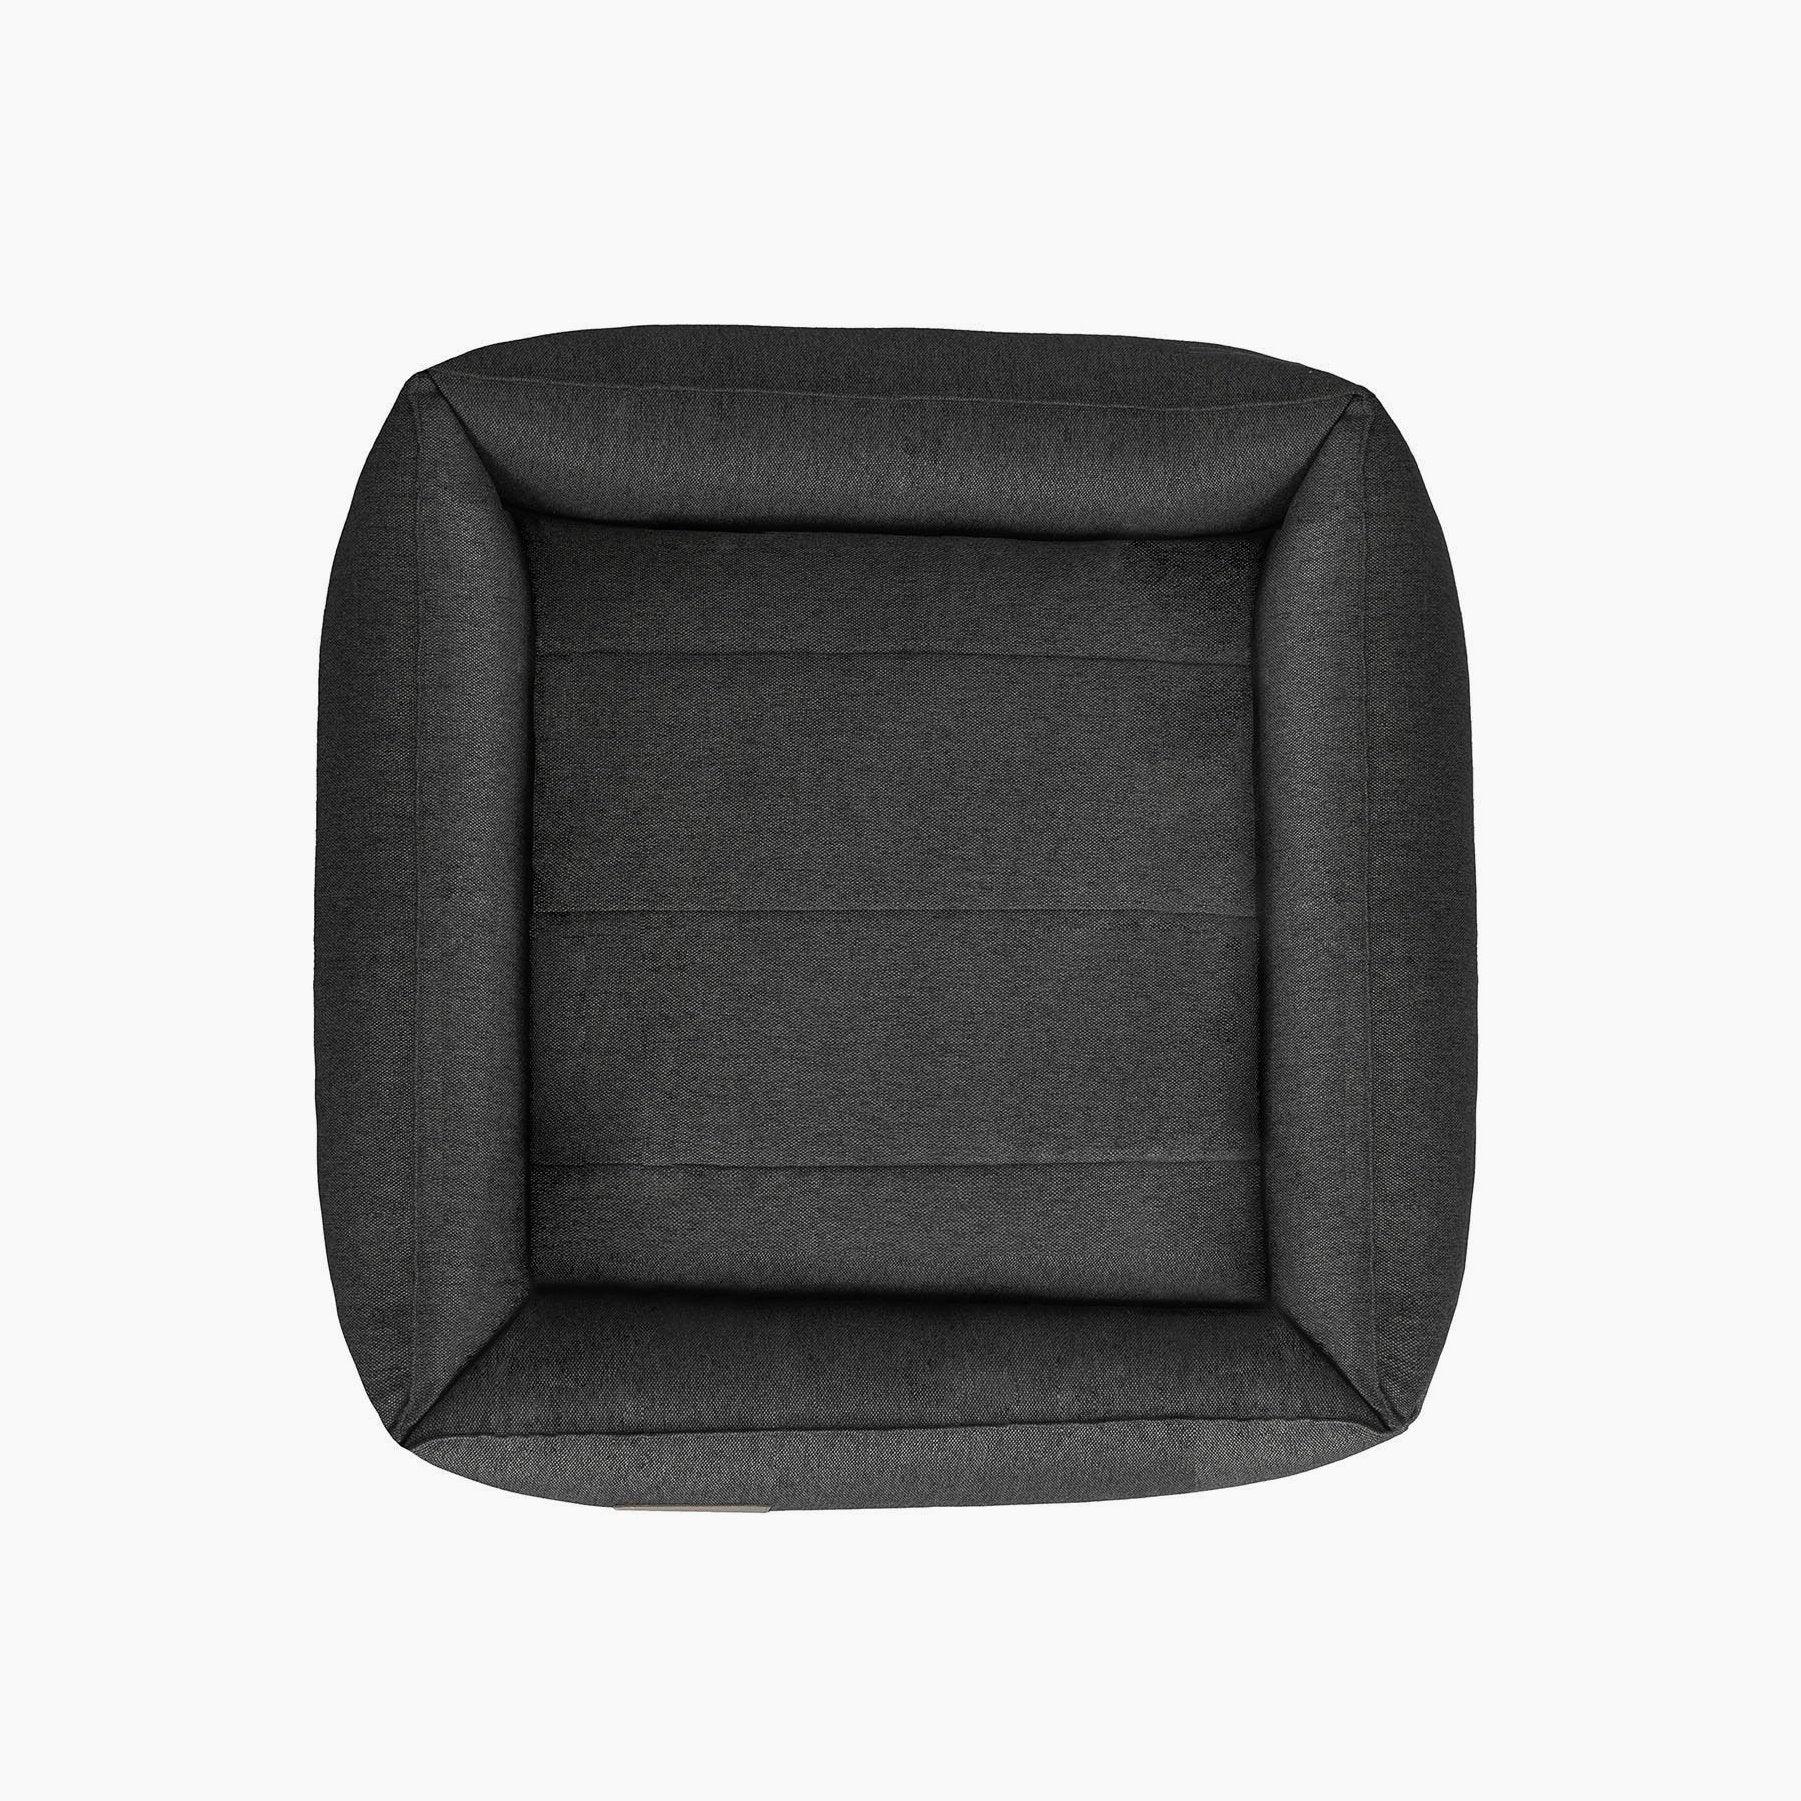 Urban Dog Bed - Graphite - NEW PETS ON THE BLOCK.COM